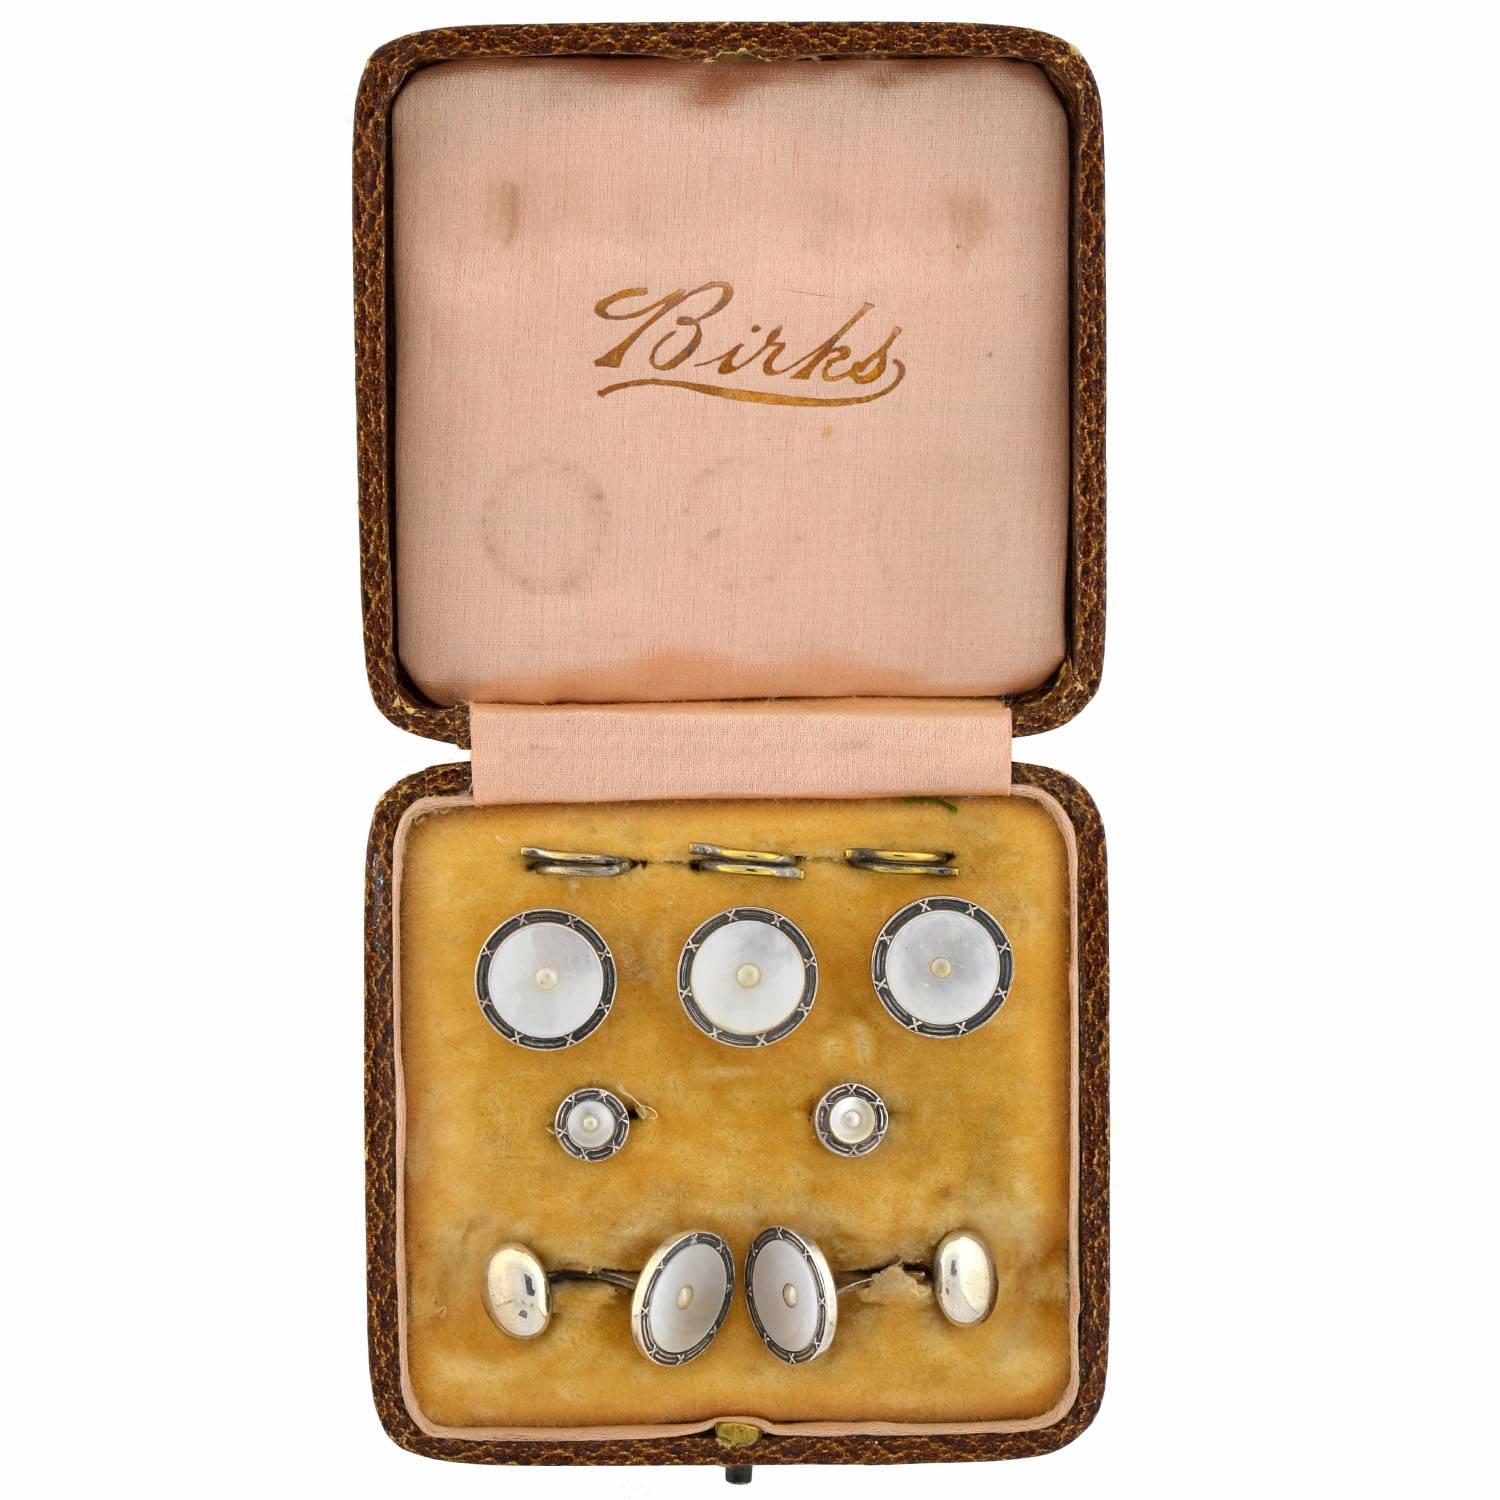 A lovely Birks cufflink set from the Art Deco (ca1920) era! This boxed set includes a pair of cufflinks, two shirt studs, and three matching buttons with connecting loops.  Each piece is crafted in sterling silver and has design that combines